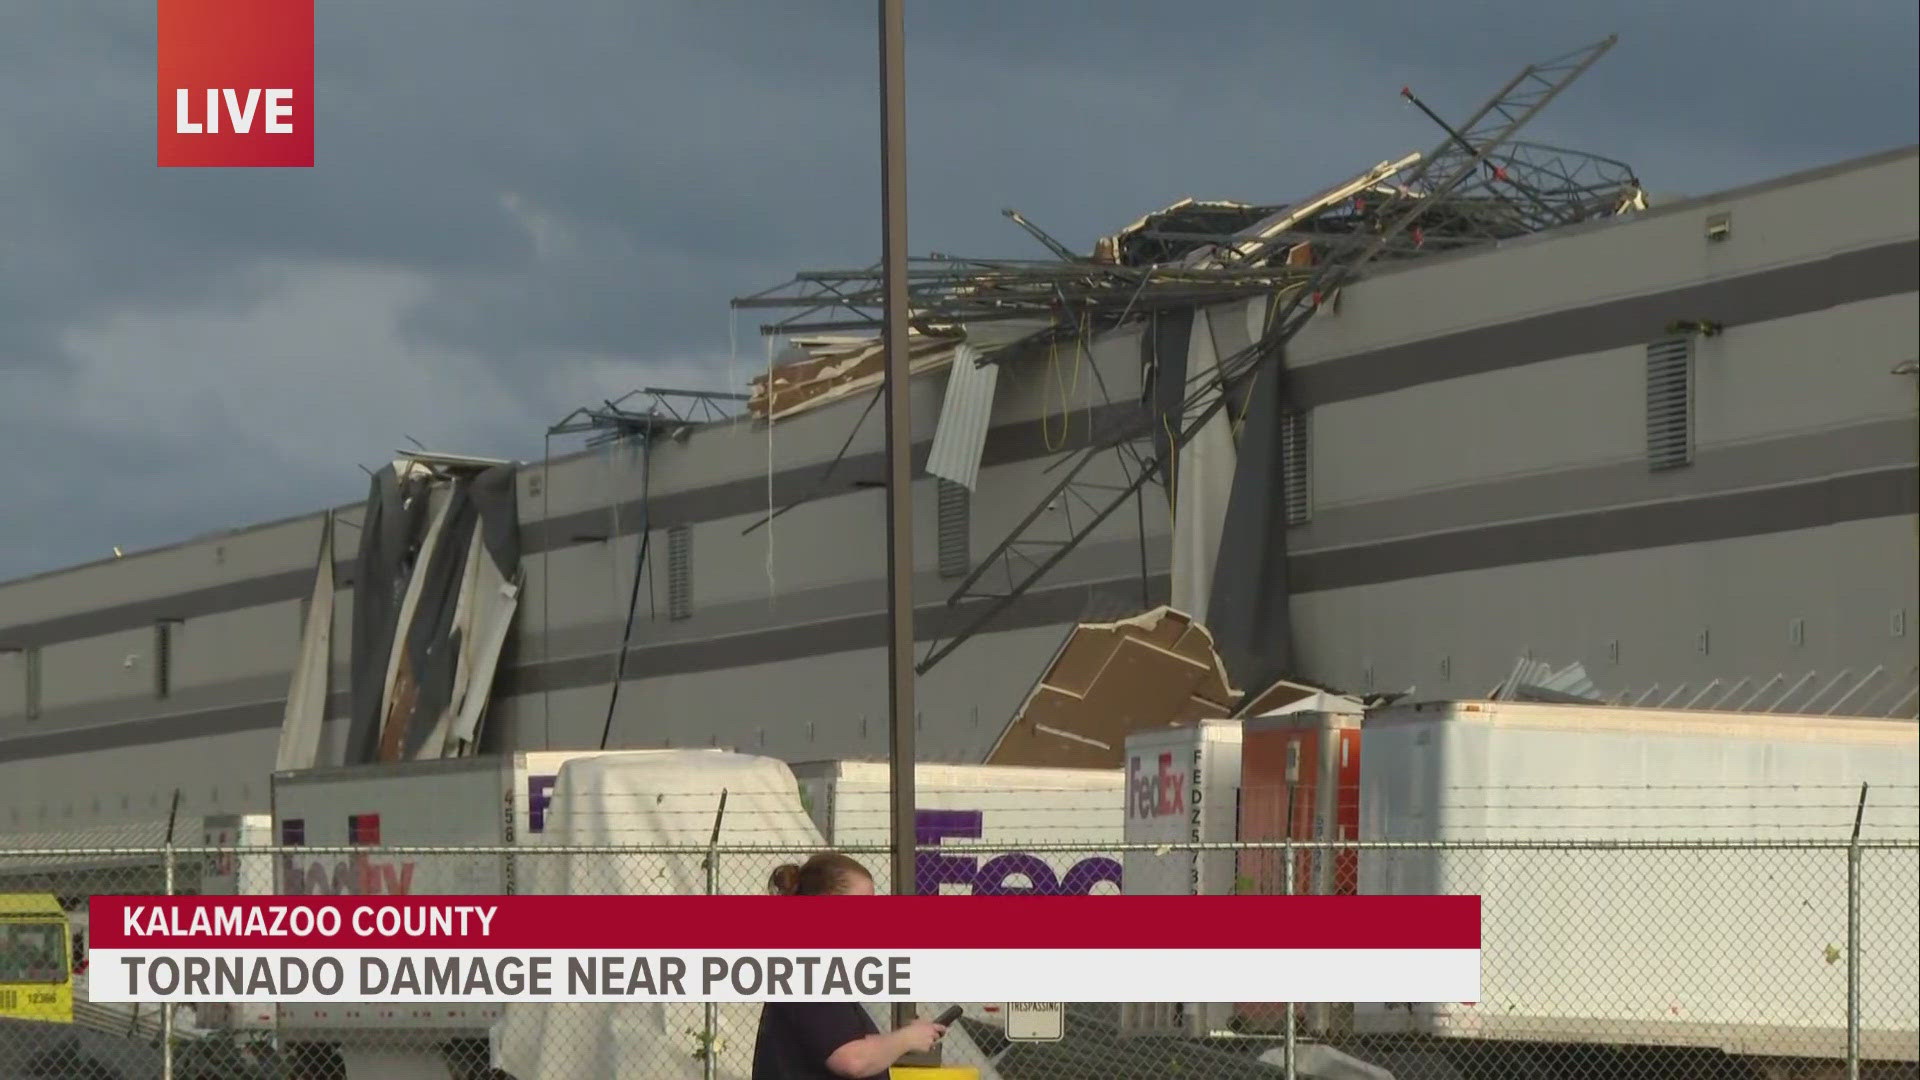 A Kalamazoo FedEx facility suffered severe damage after multiple tornadoes in the area.